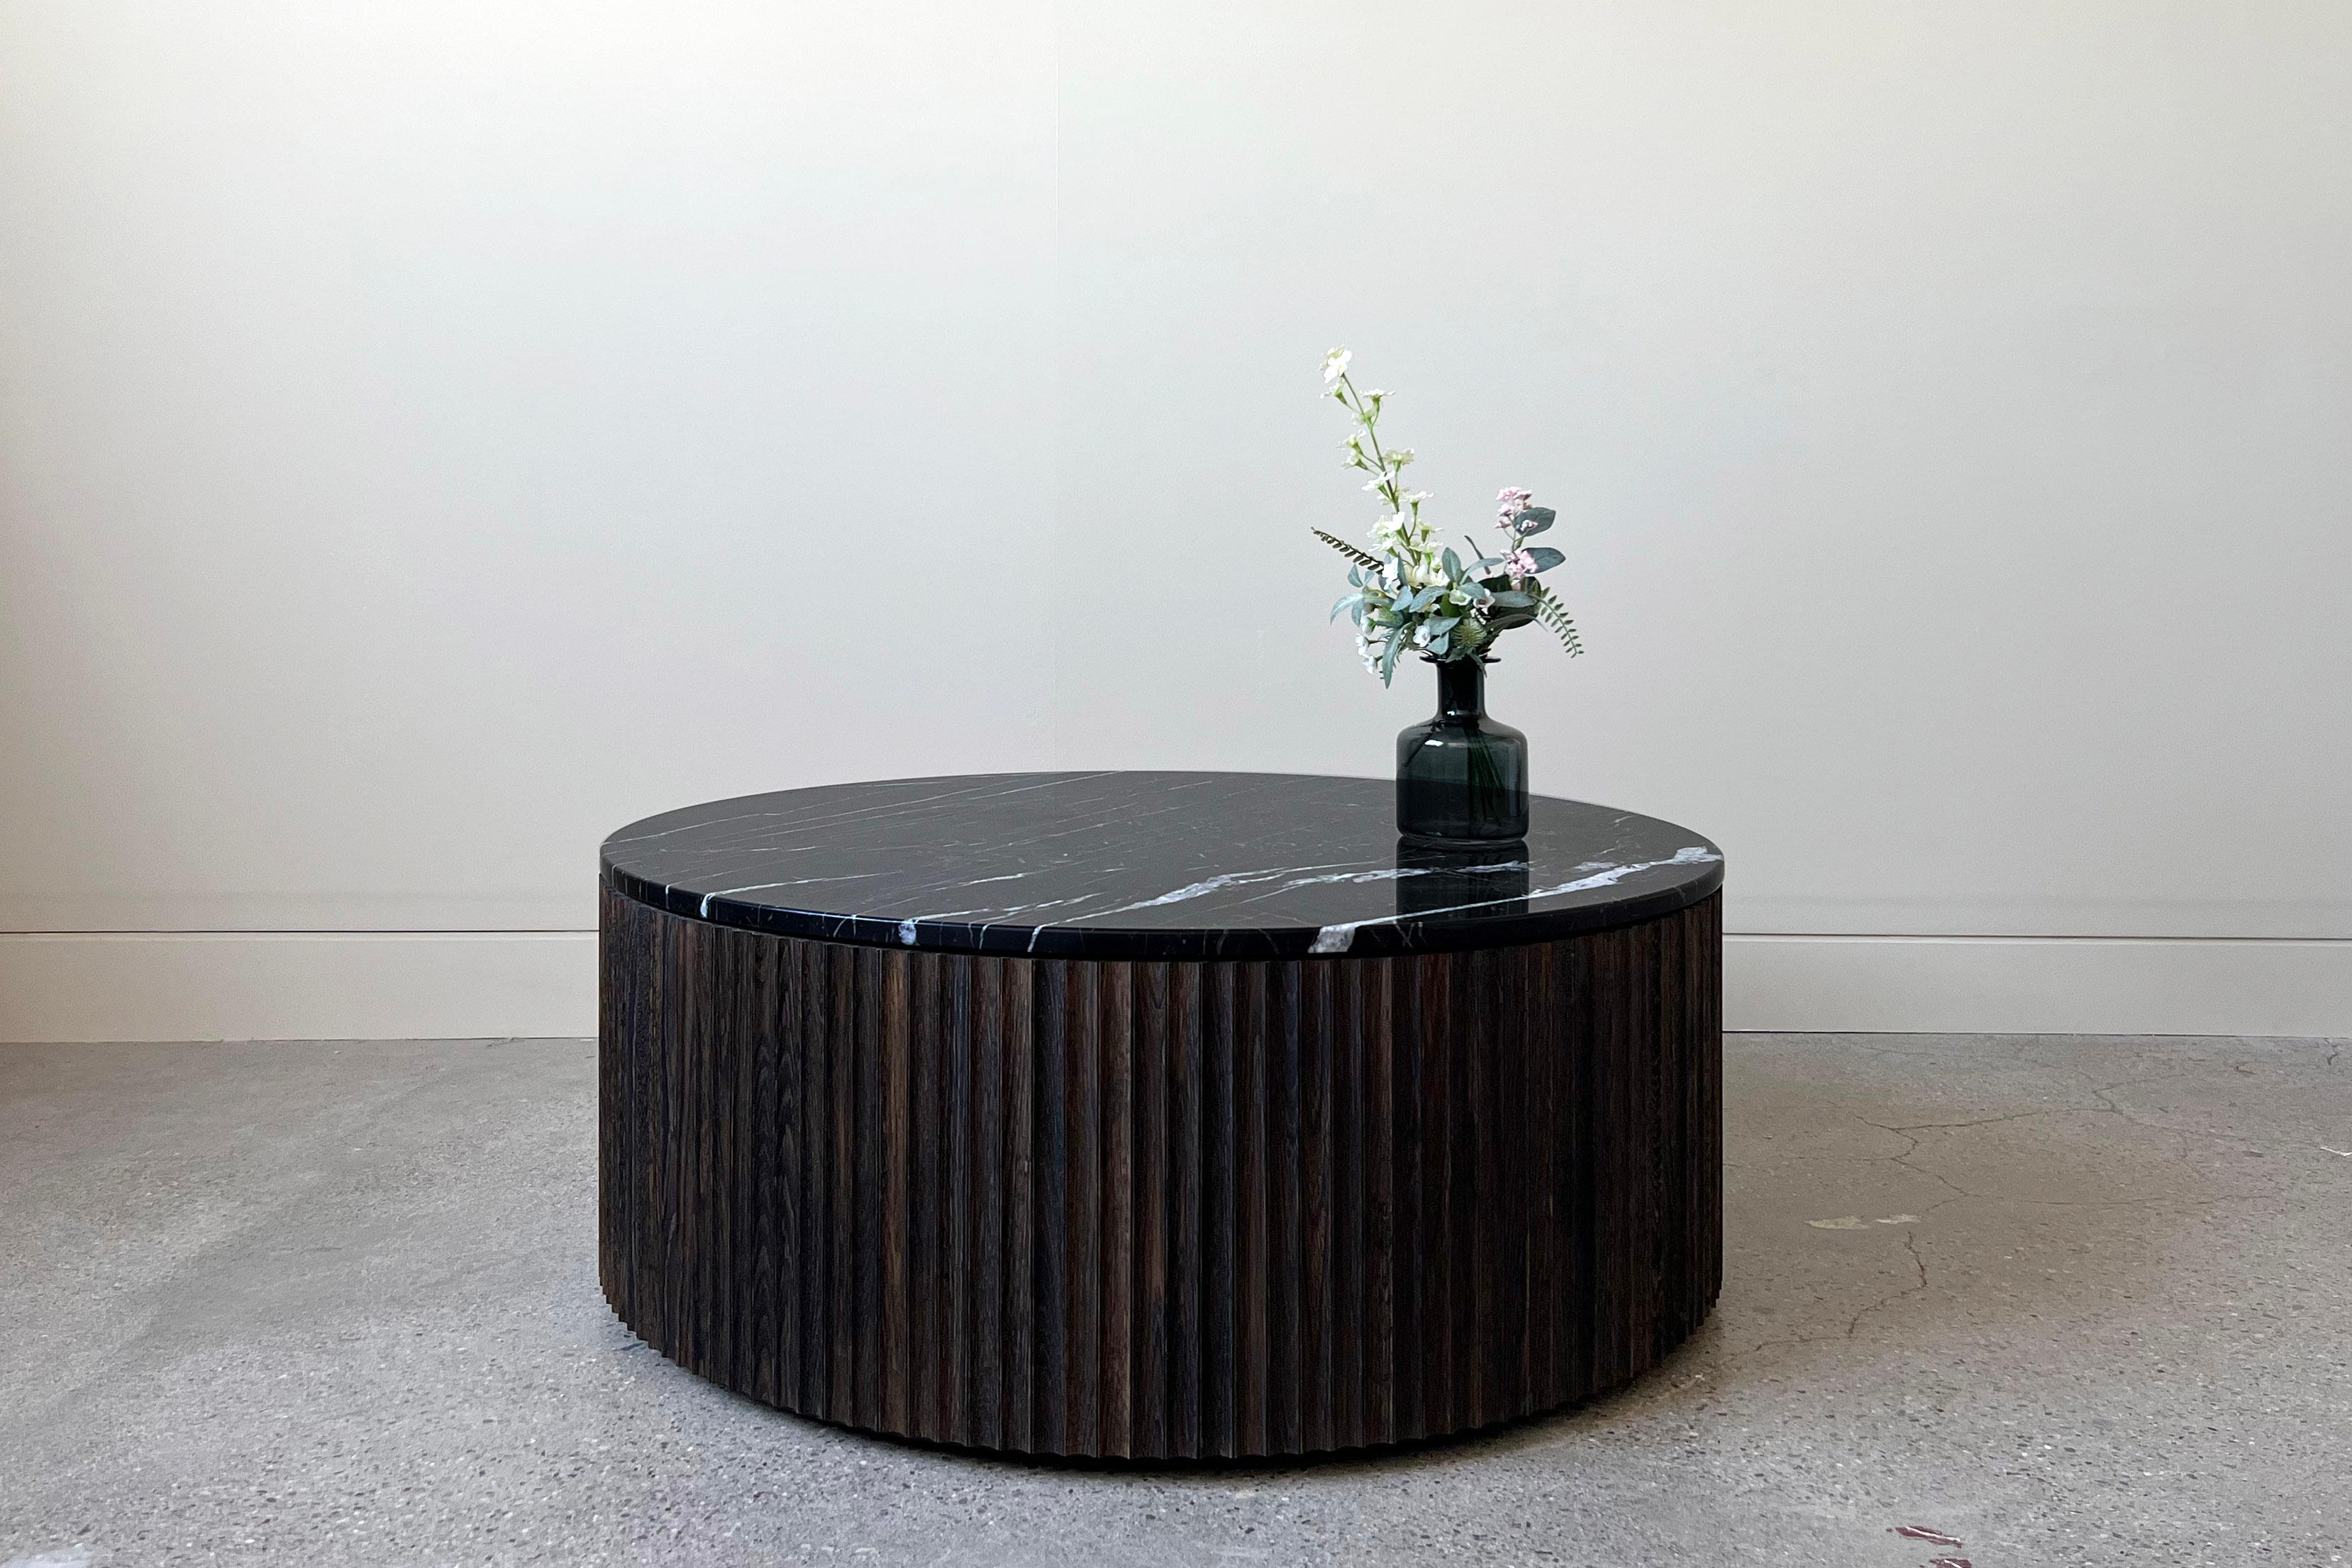 Hand-Crafted Pilar Round Coffee Table / Oxidized Oak Wood, Nero Marquina Marble Top by INDO- For Sale